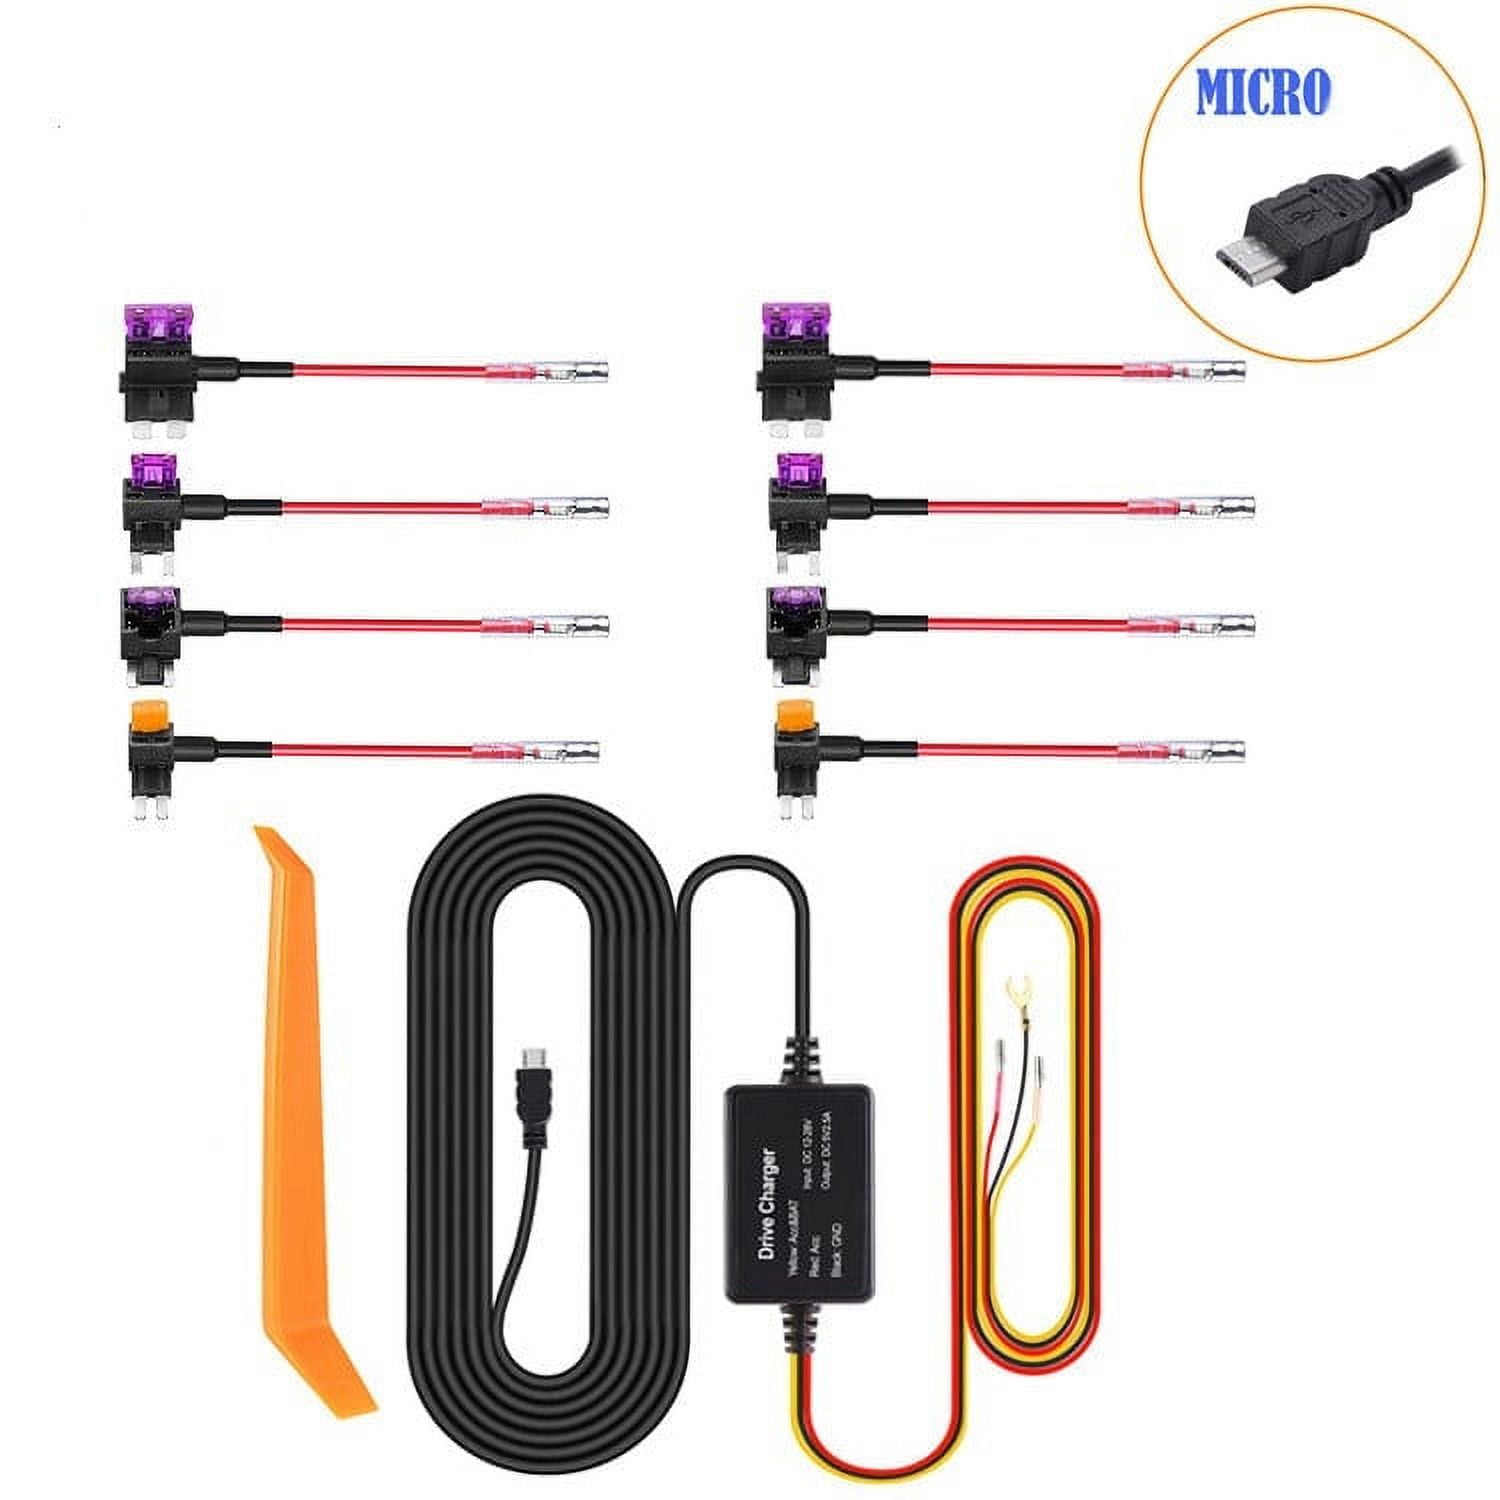 TITOUMI Buck Line 24 Hour Parking Monitoring，Hardwire Kit Charging Cable  Charger 12V To 5V ，DashCam Dash Camera DVR Camera Recorder 